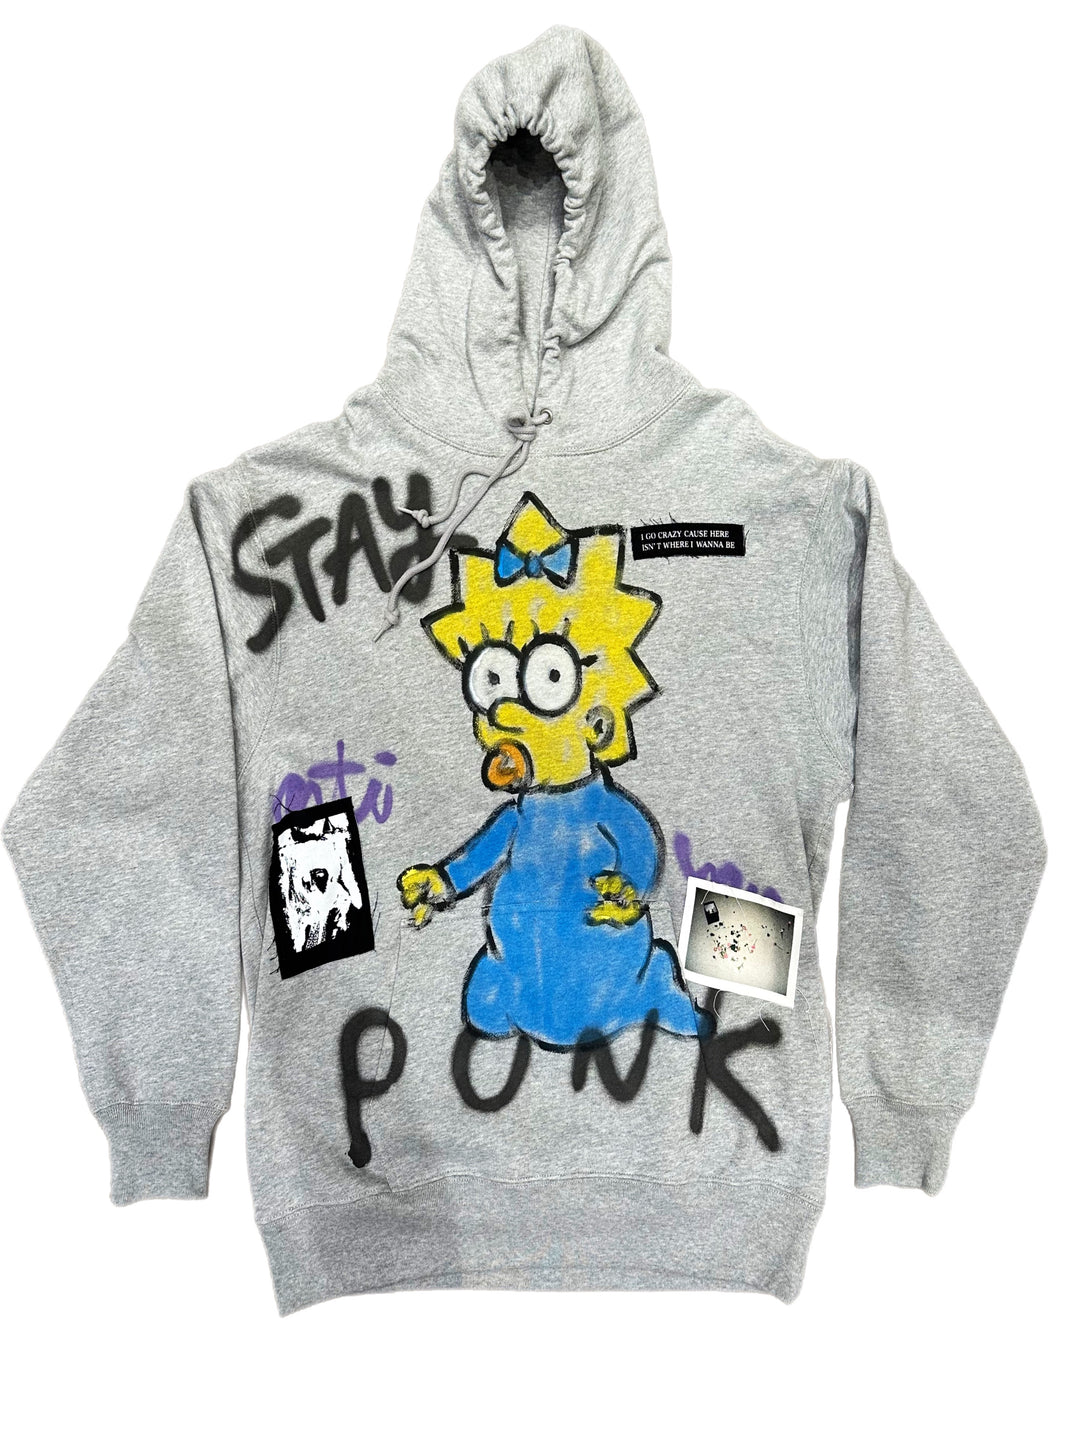 3NYCONCEPT.COM - STAY PUNK GUERNIKA HOODIE 3242.1